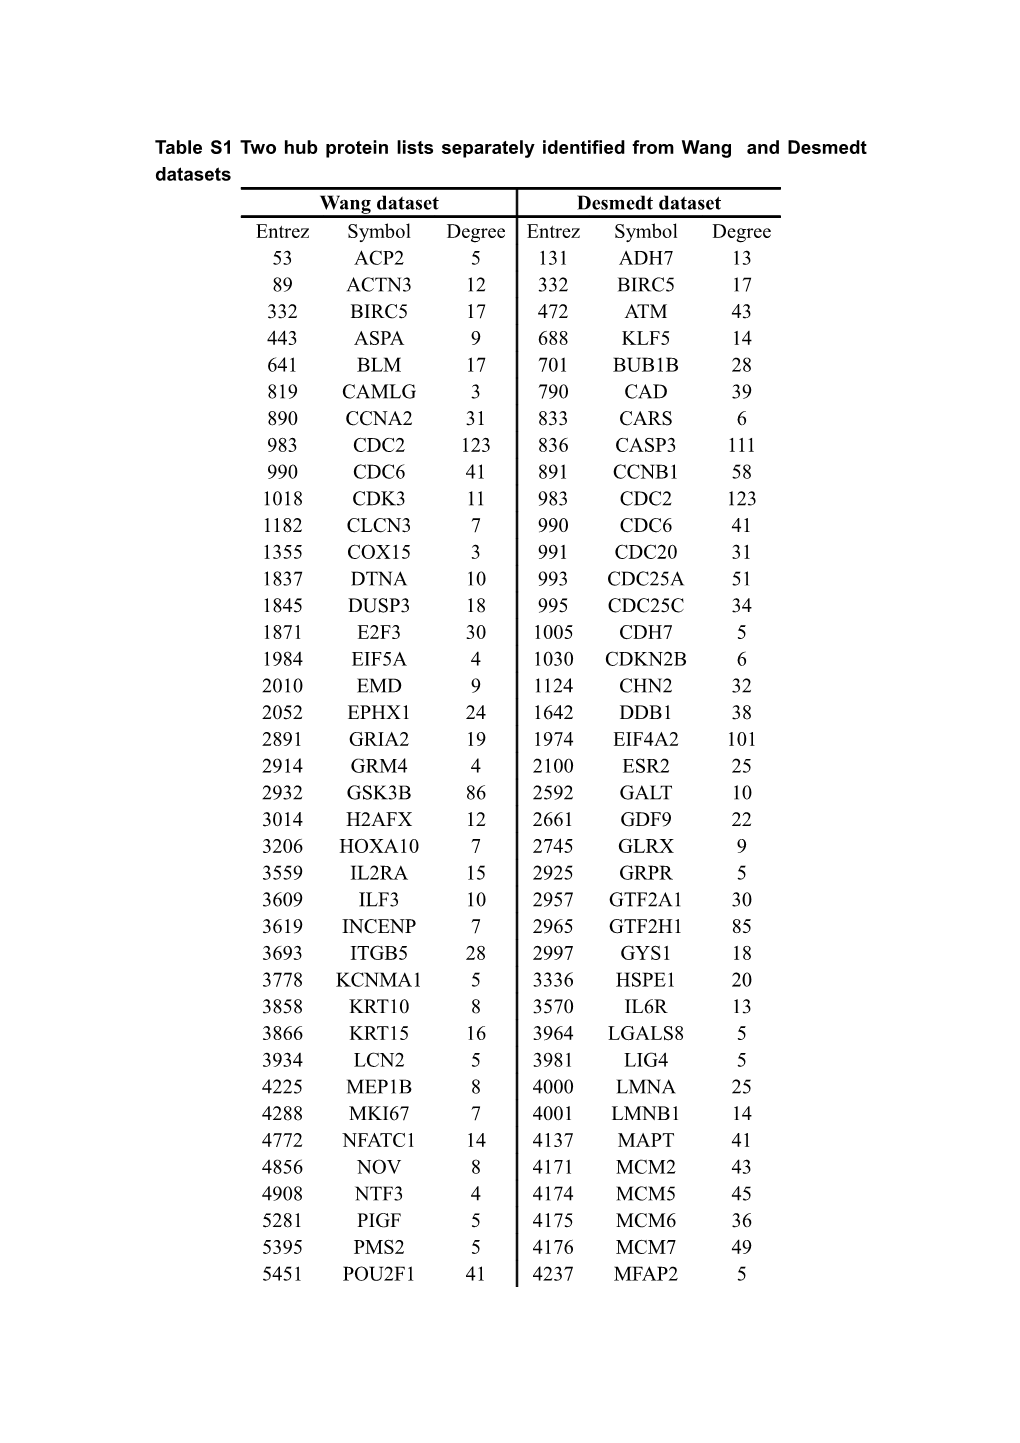 Supplemental Table S1 Two Hub Protein Lists Separately Identified from Wang Et Al (2005)